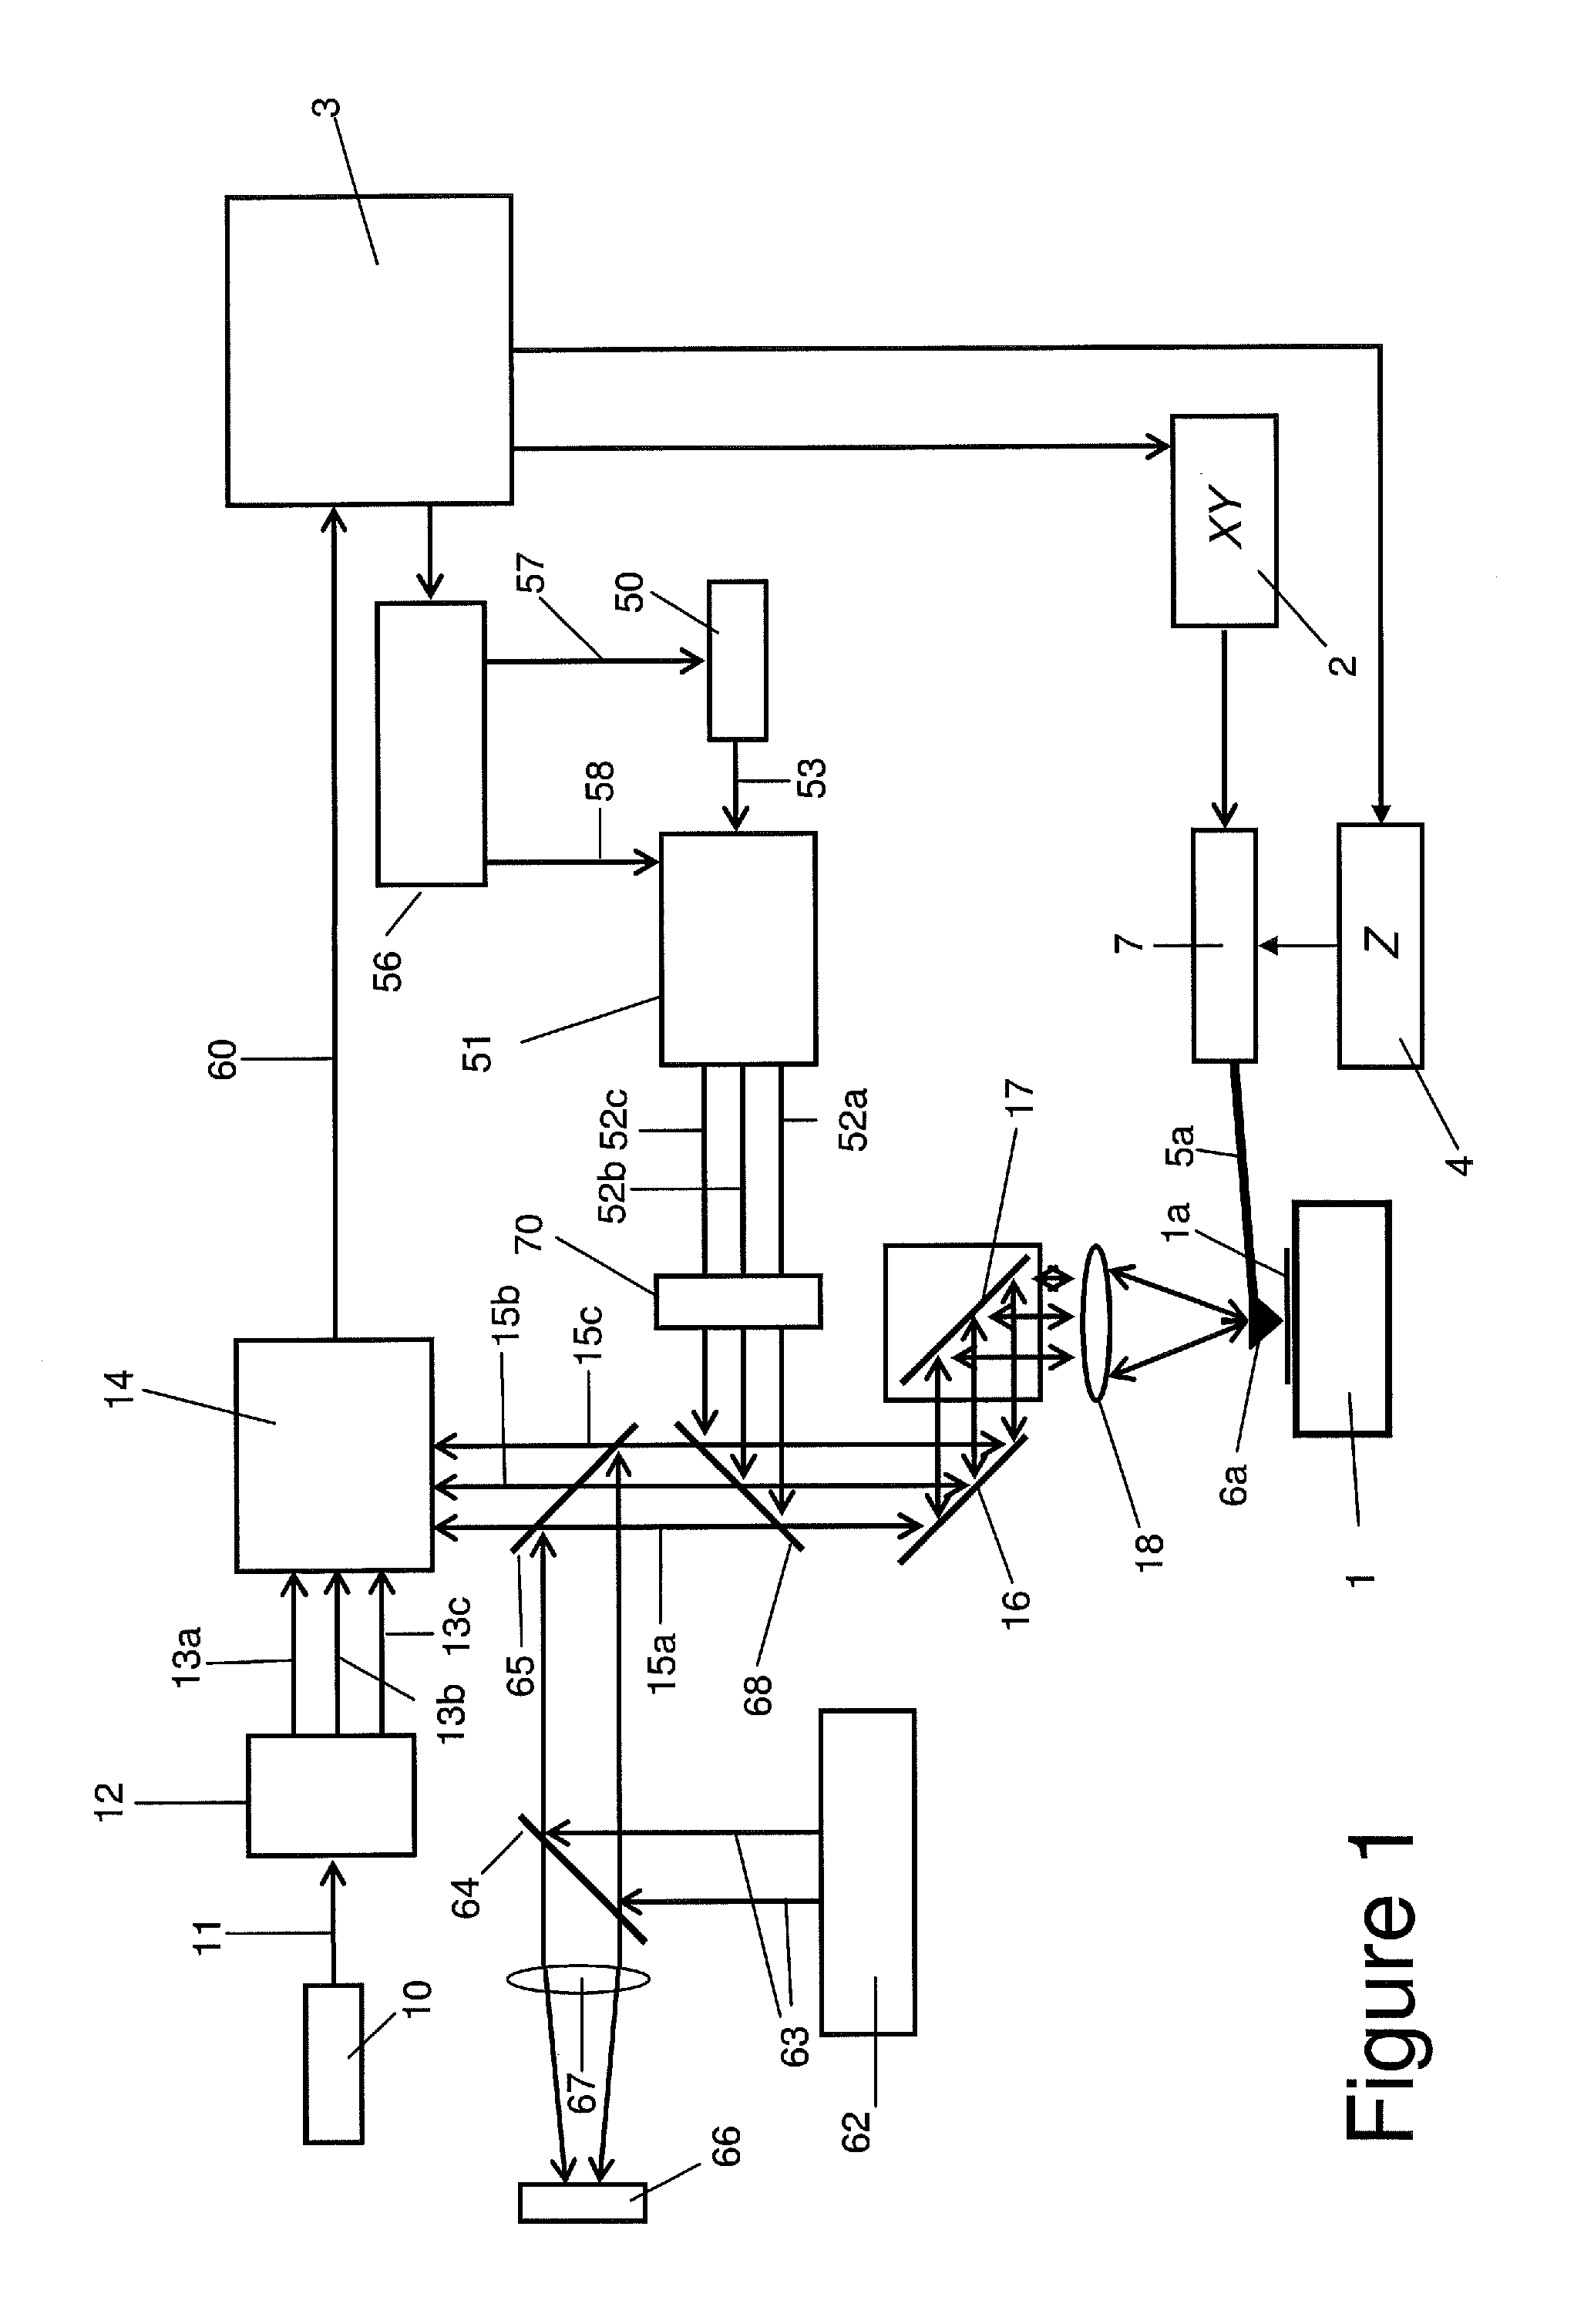 Multiple probe detection and actuation